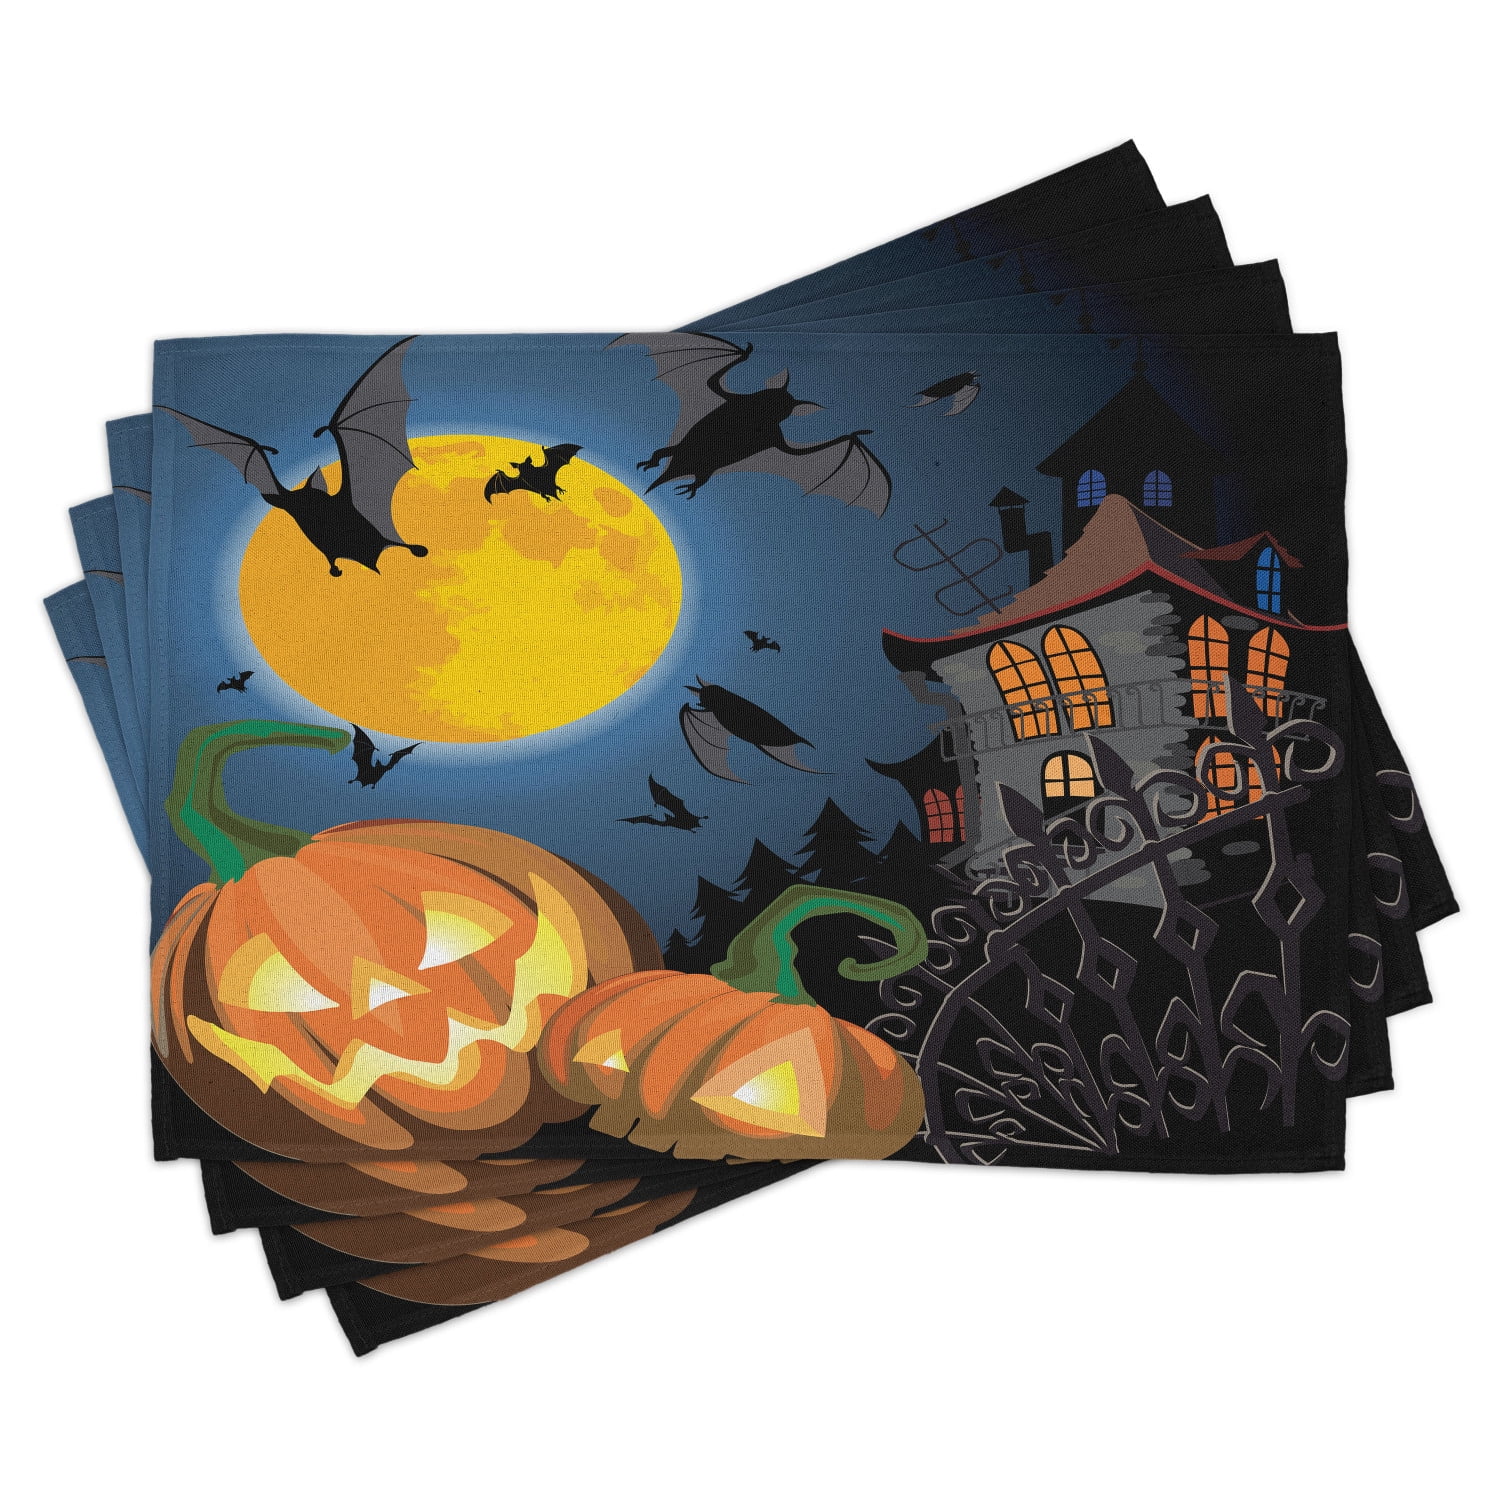 Halloween Decoration Fall Table Placemat.